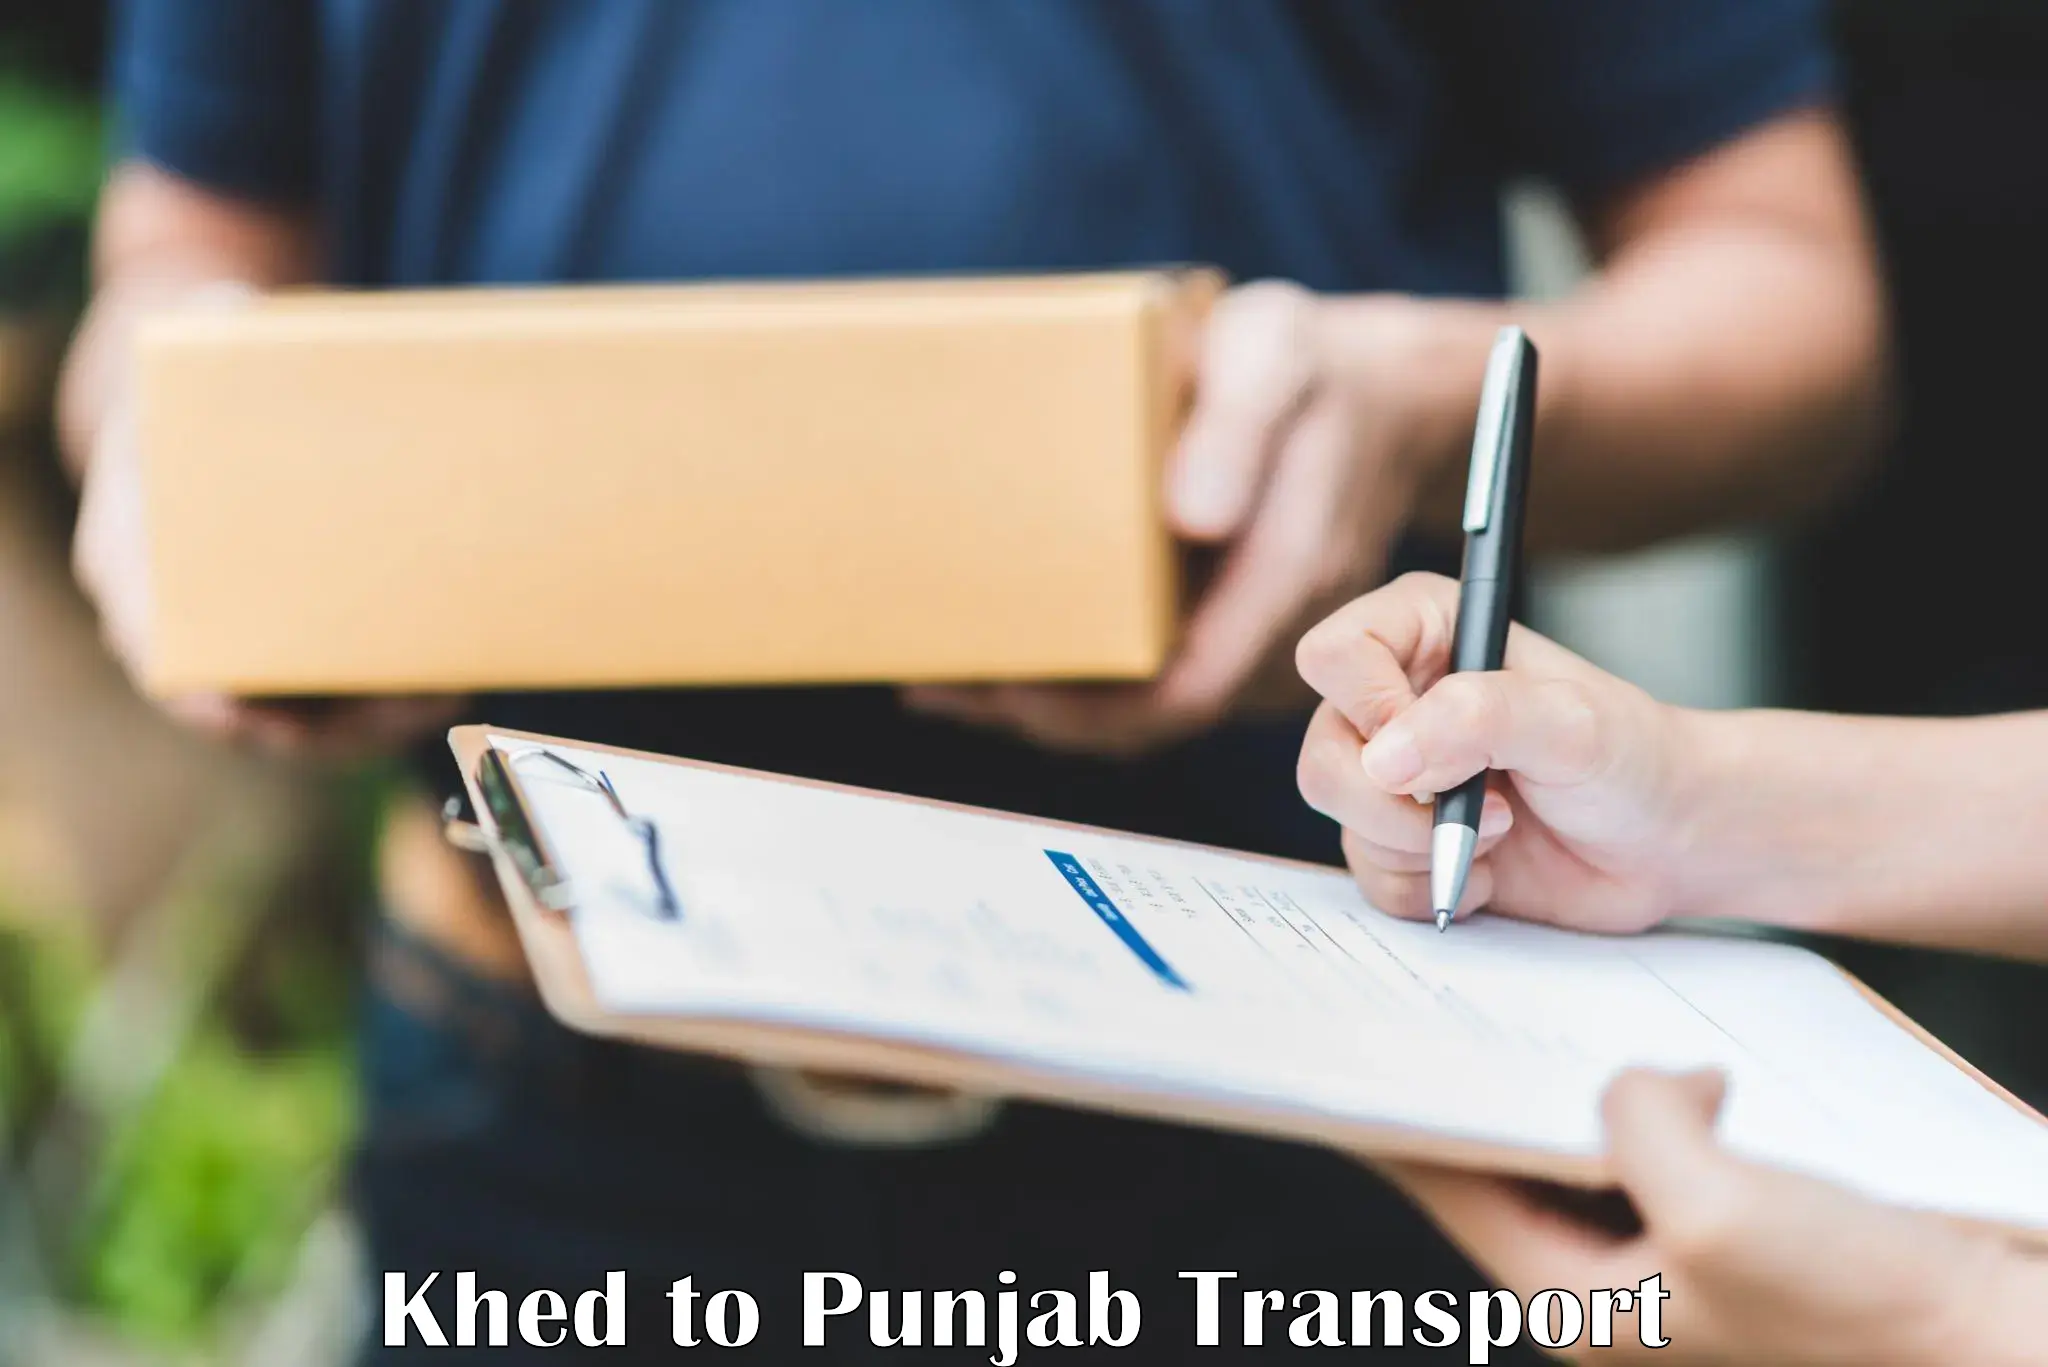 Transport shared services in Khed to Hoshiarpur